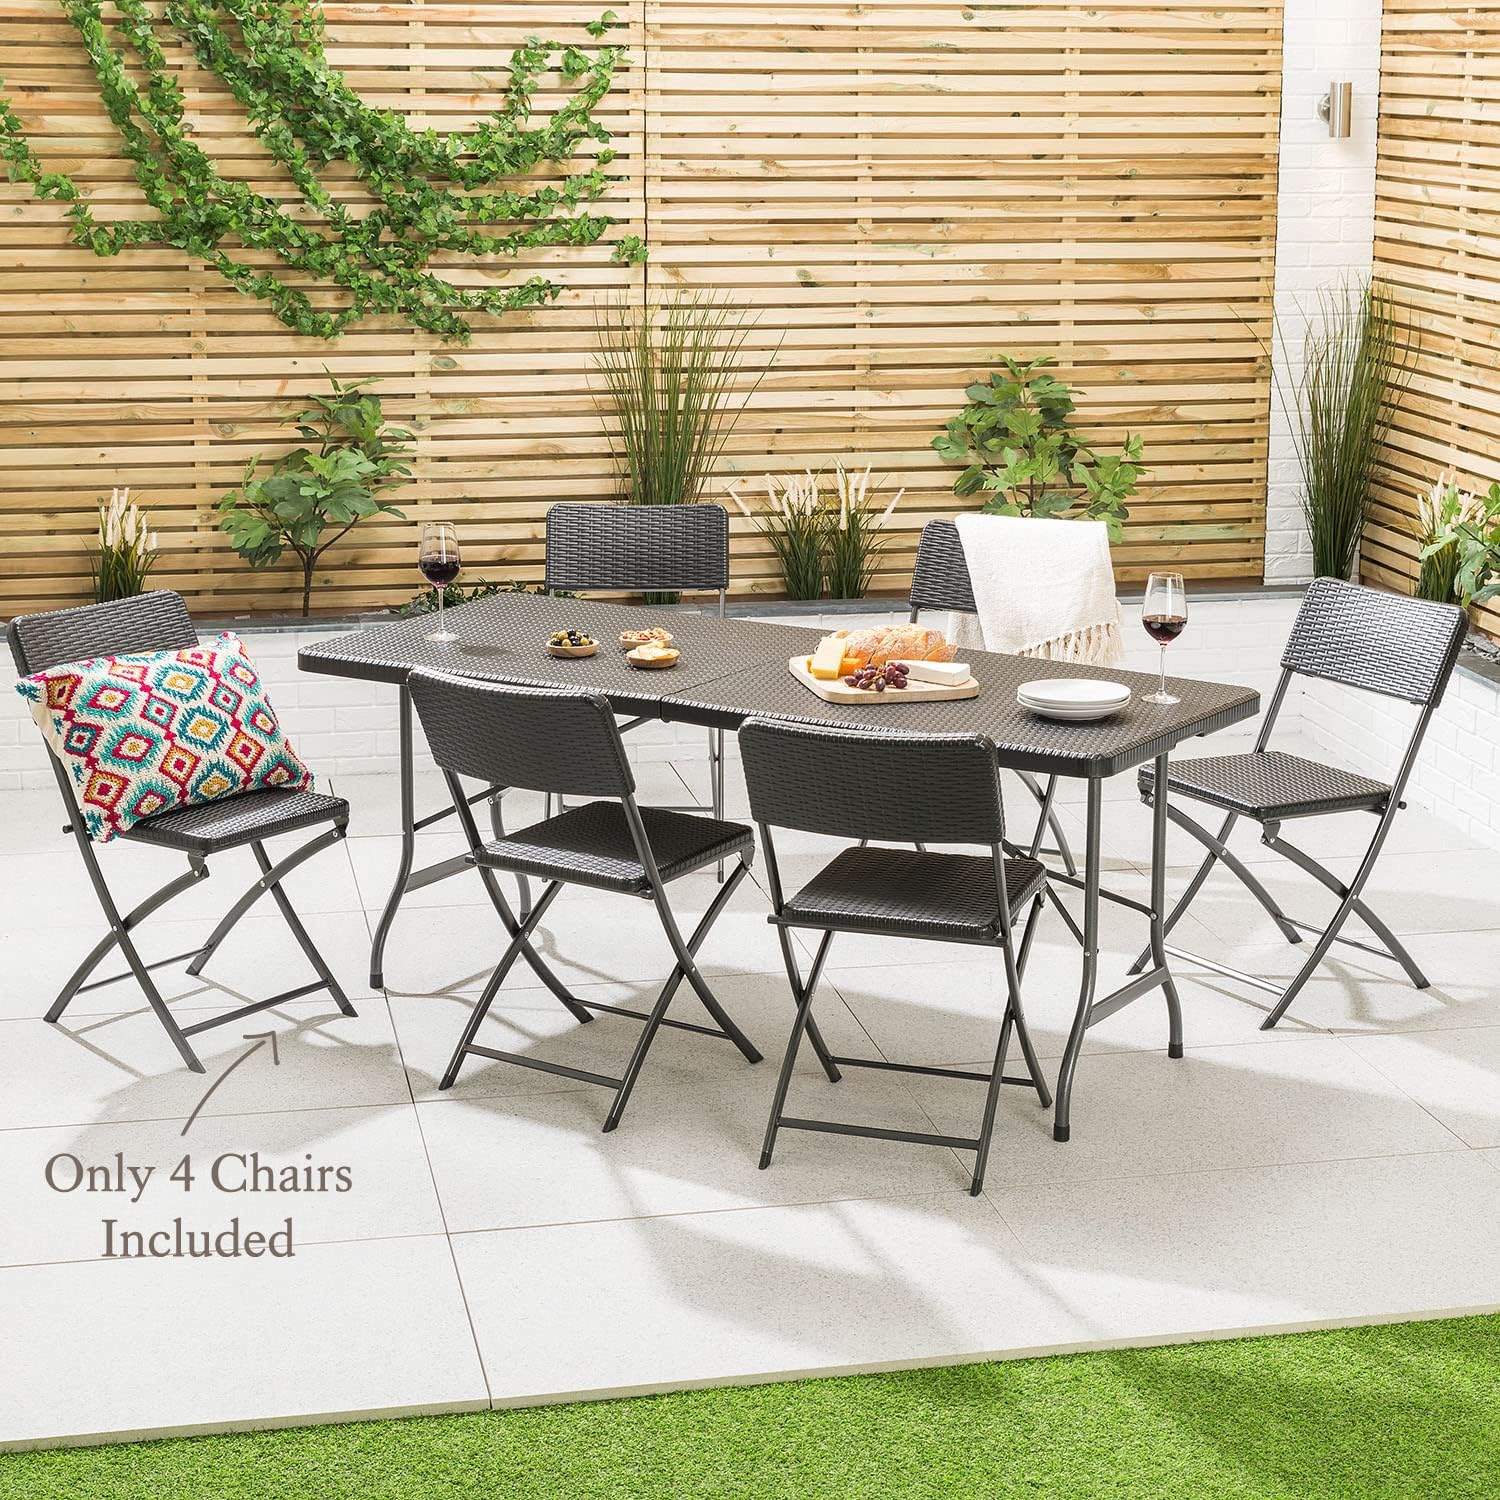 CHRISTOW Garden Tables and Chairs